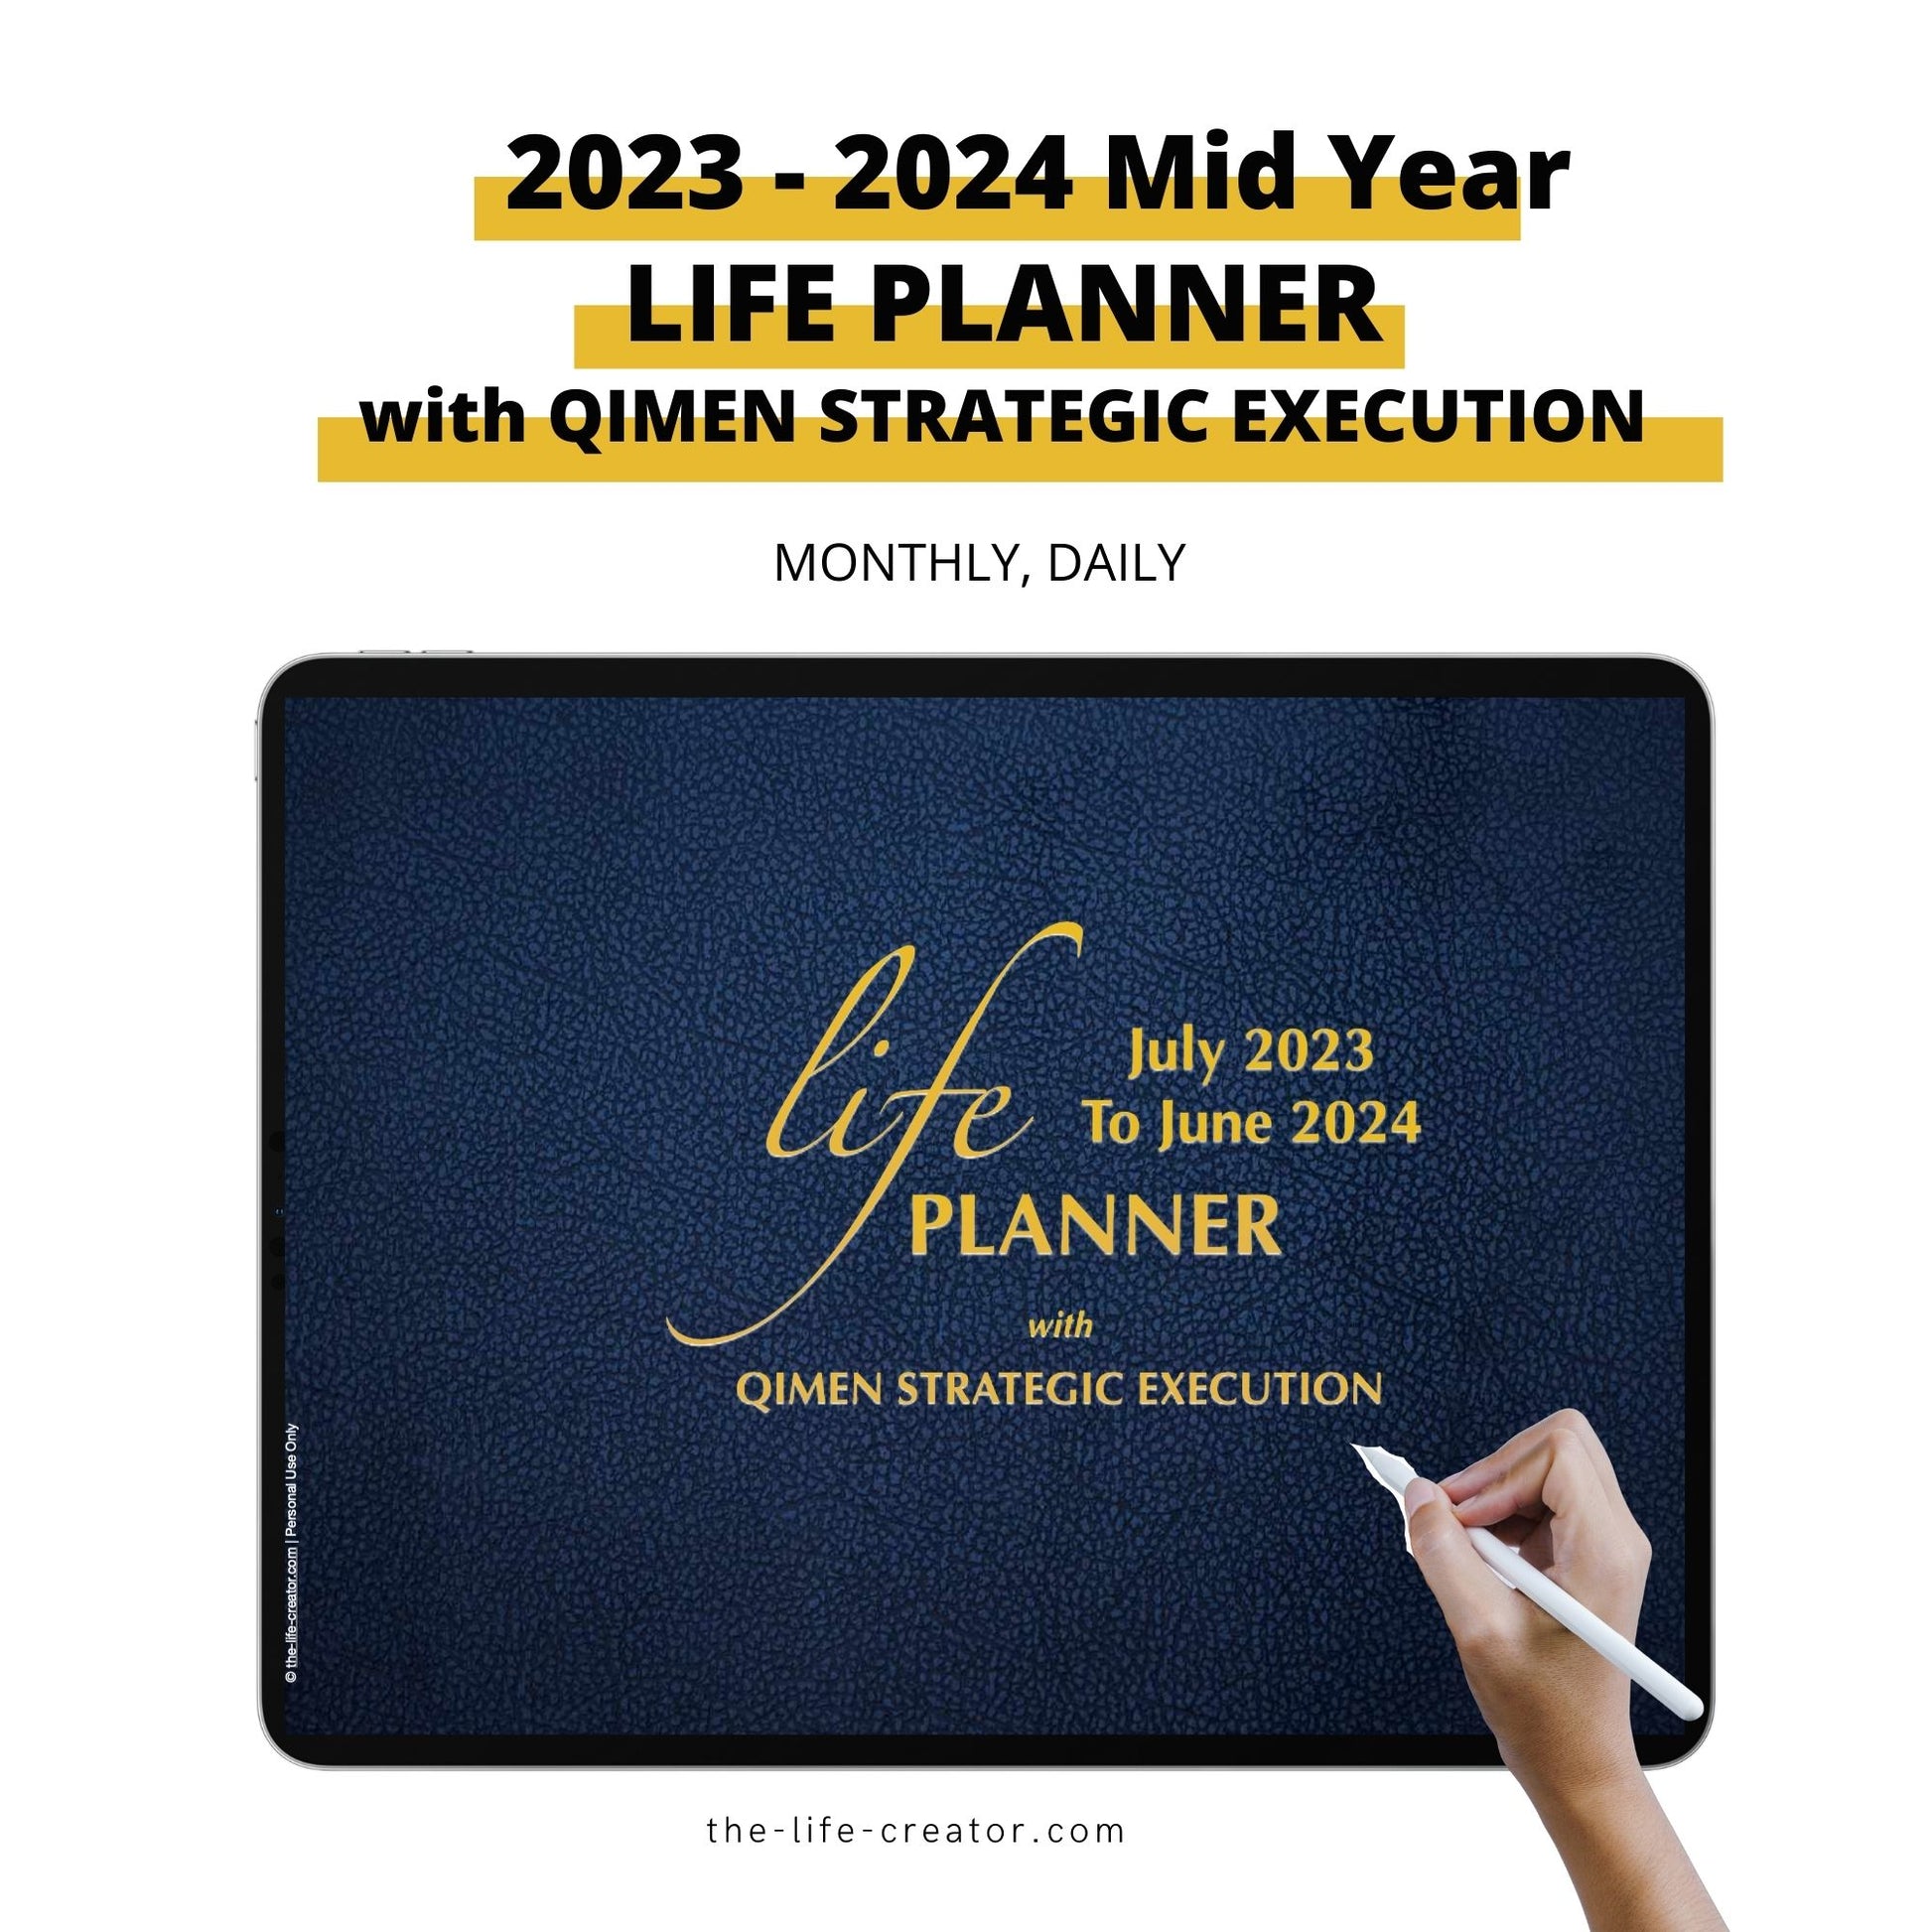 2023 2024 Mid Year Digital Life Planner with QIMEN Strategic Execution –  The Life Creator